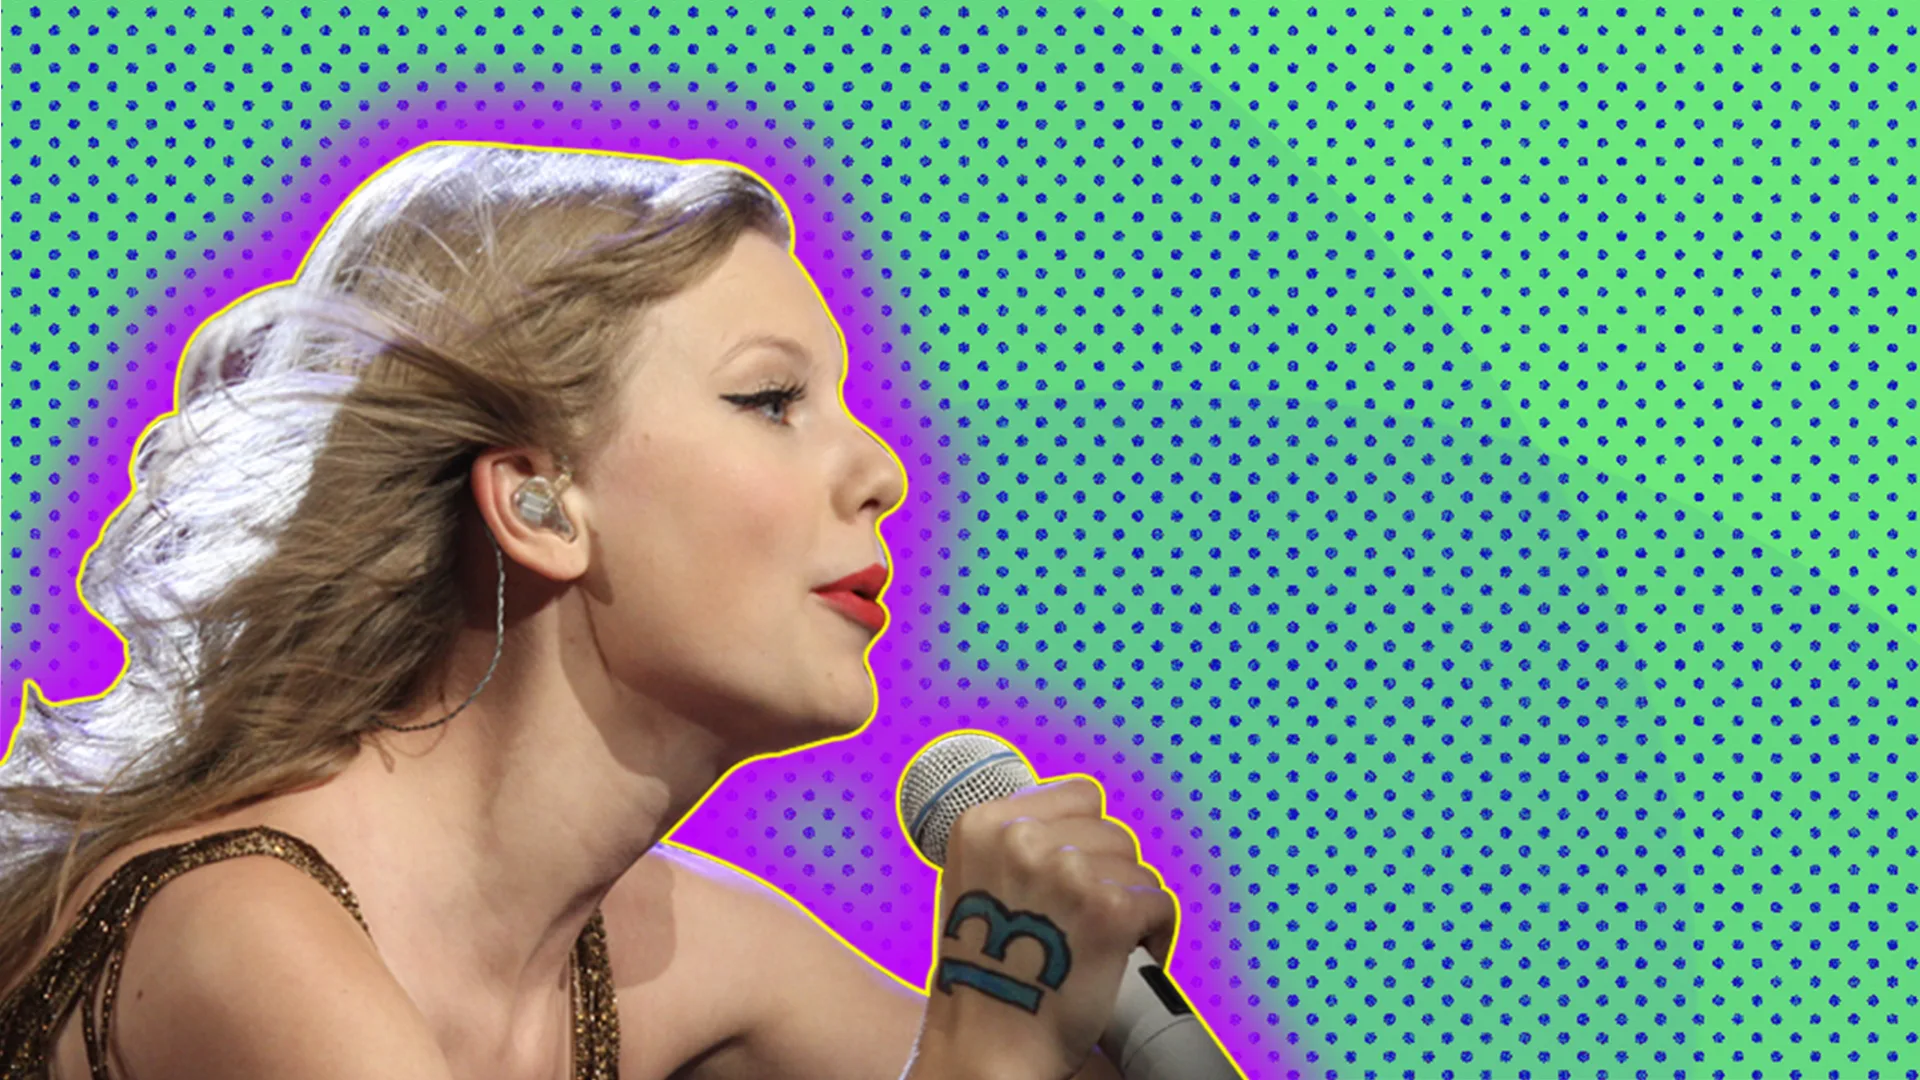 Taylor Swift singing live with a polkadot background and a glow around the image